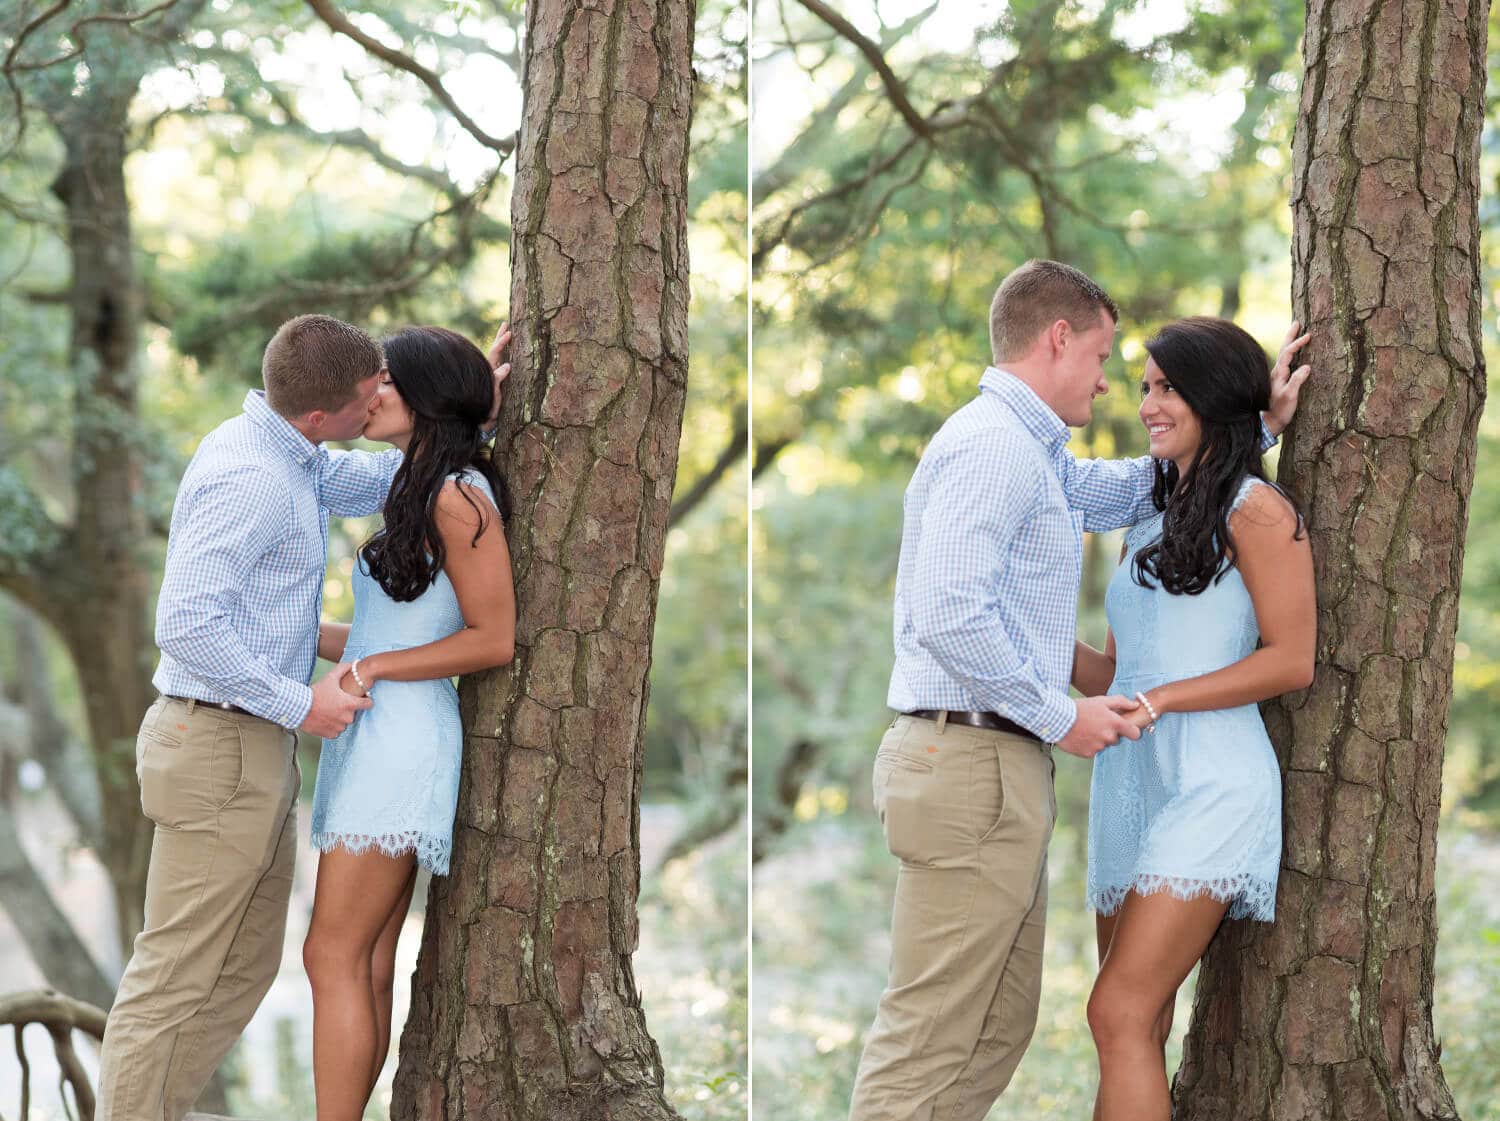 Couple leaning against tree together before proposal